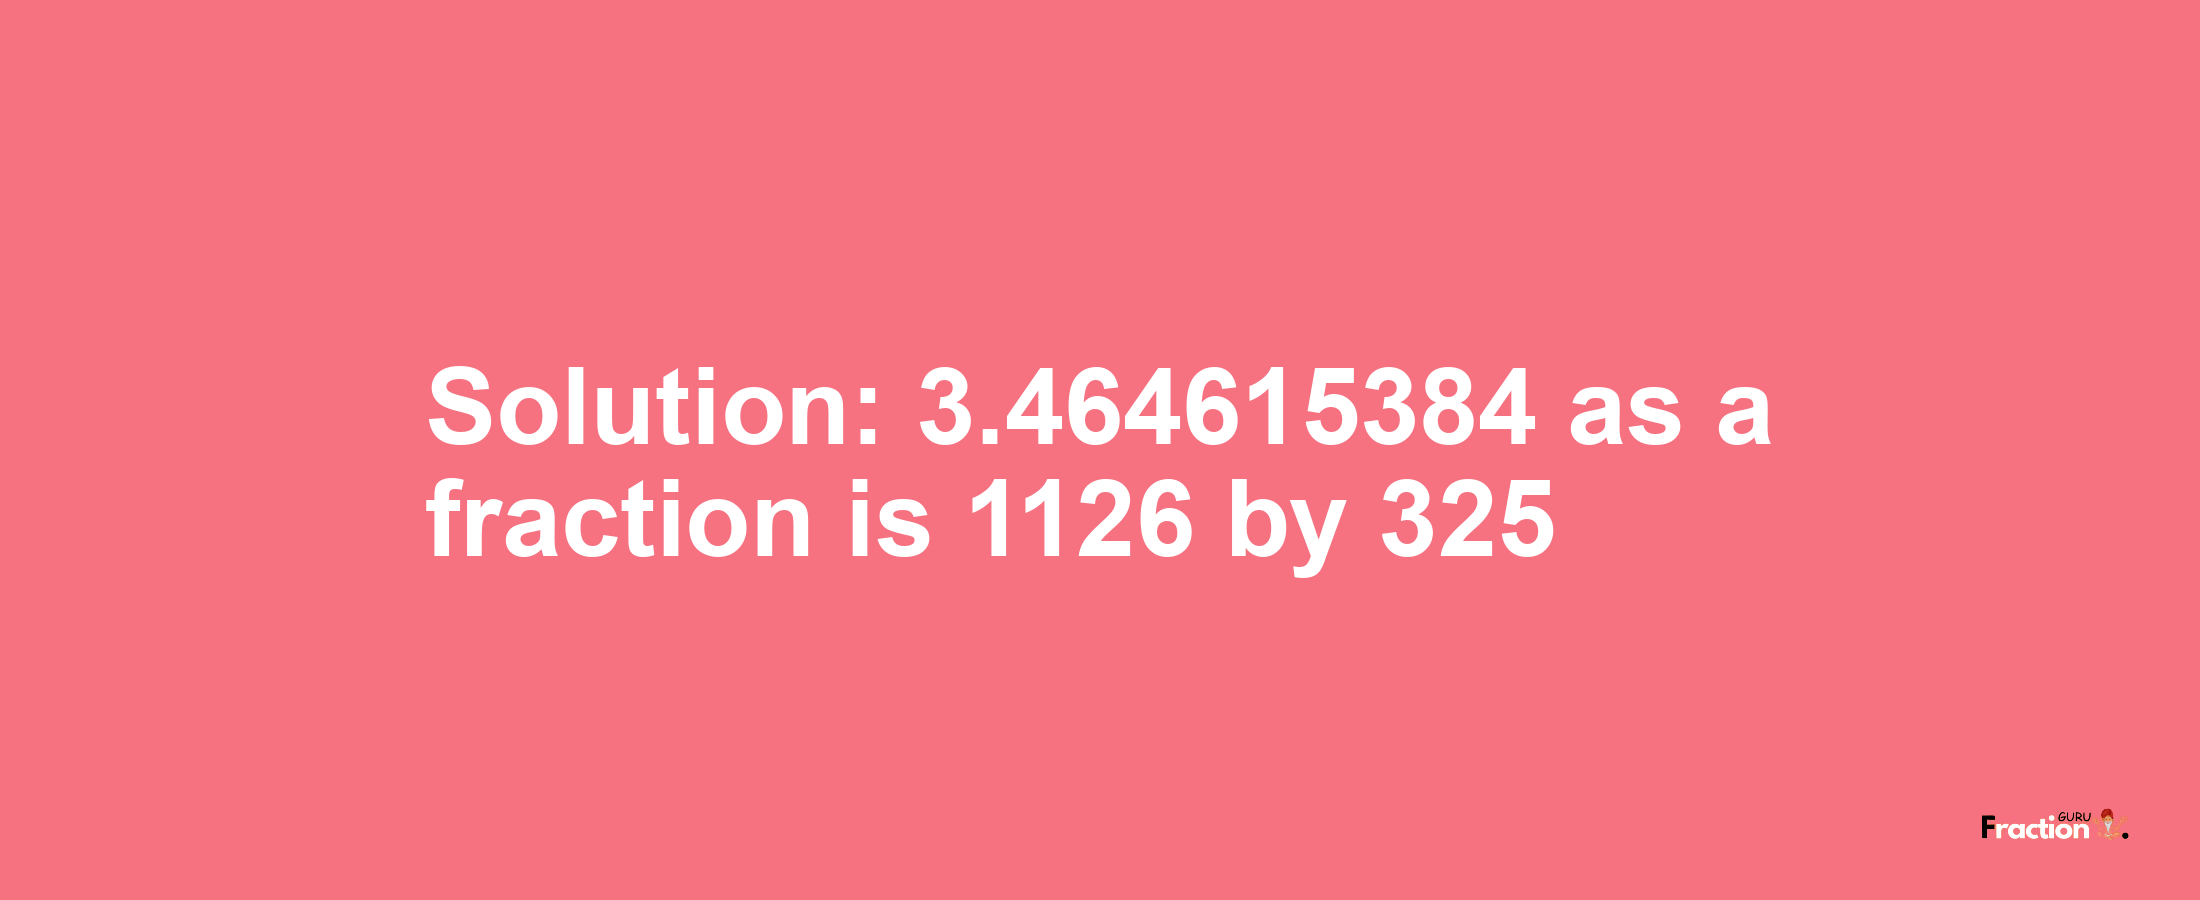 Solution:3.464615384 as a fraction is 1126/325